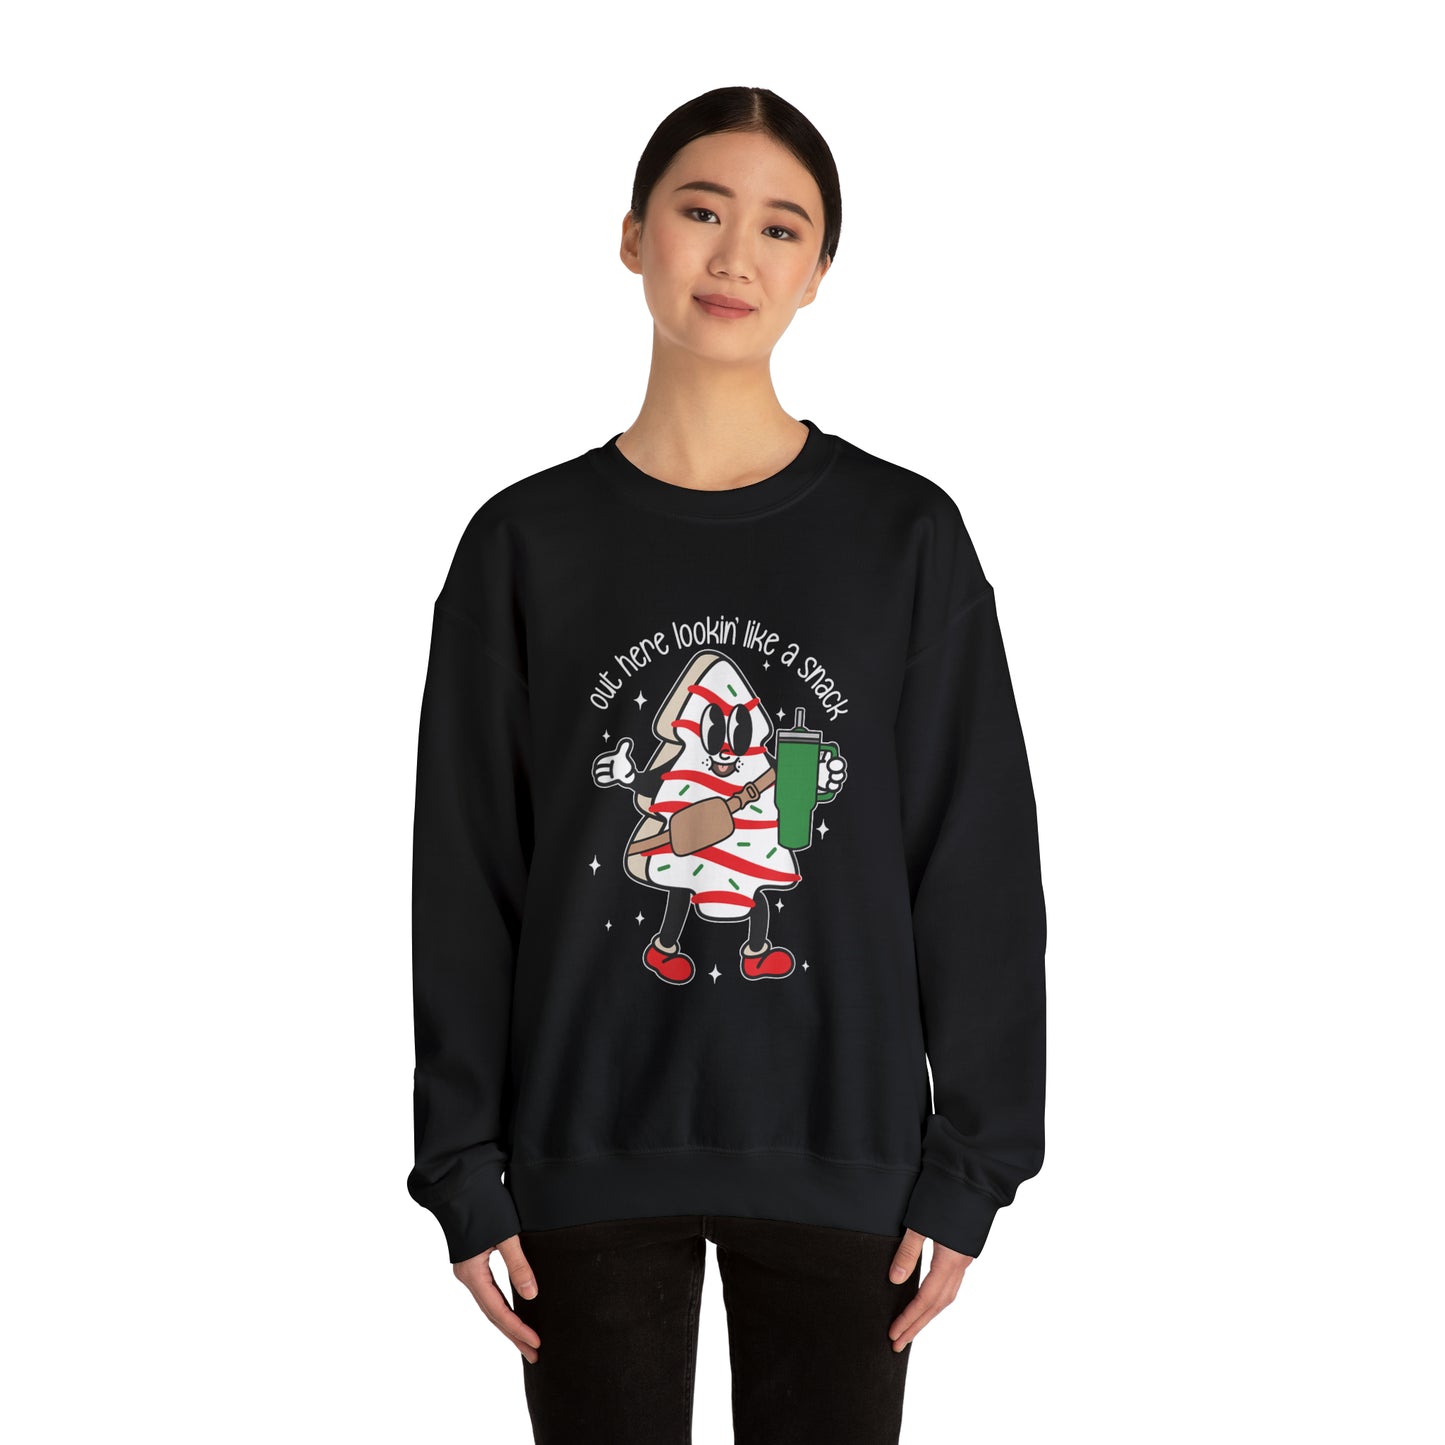 Out Here Looking Like A Snack Unisex Heavy Blend Crewneck Sweatshirt